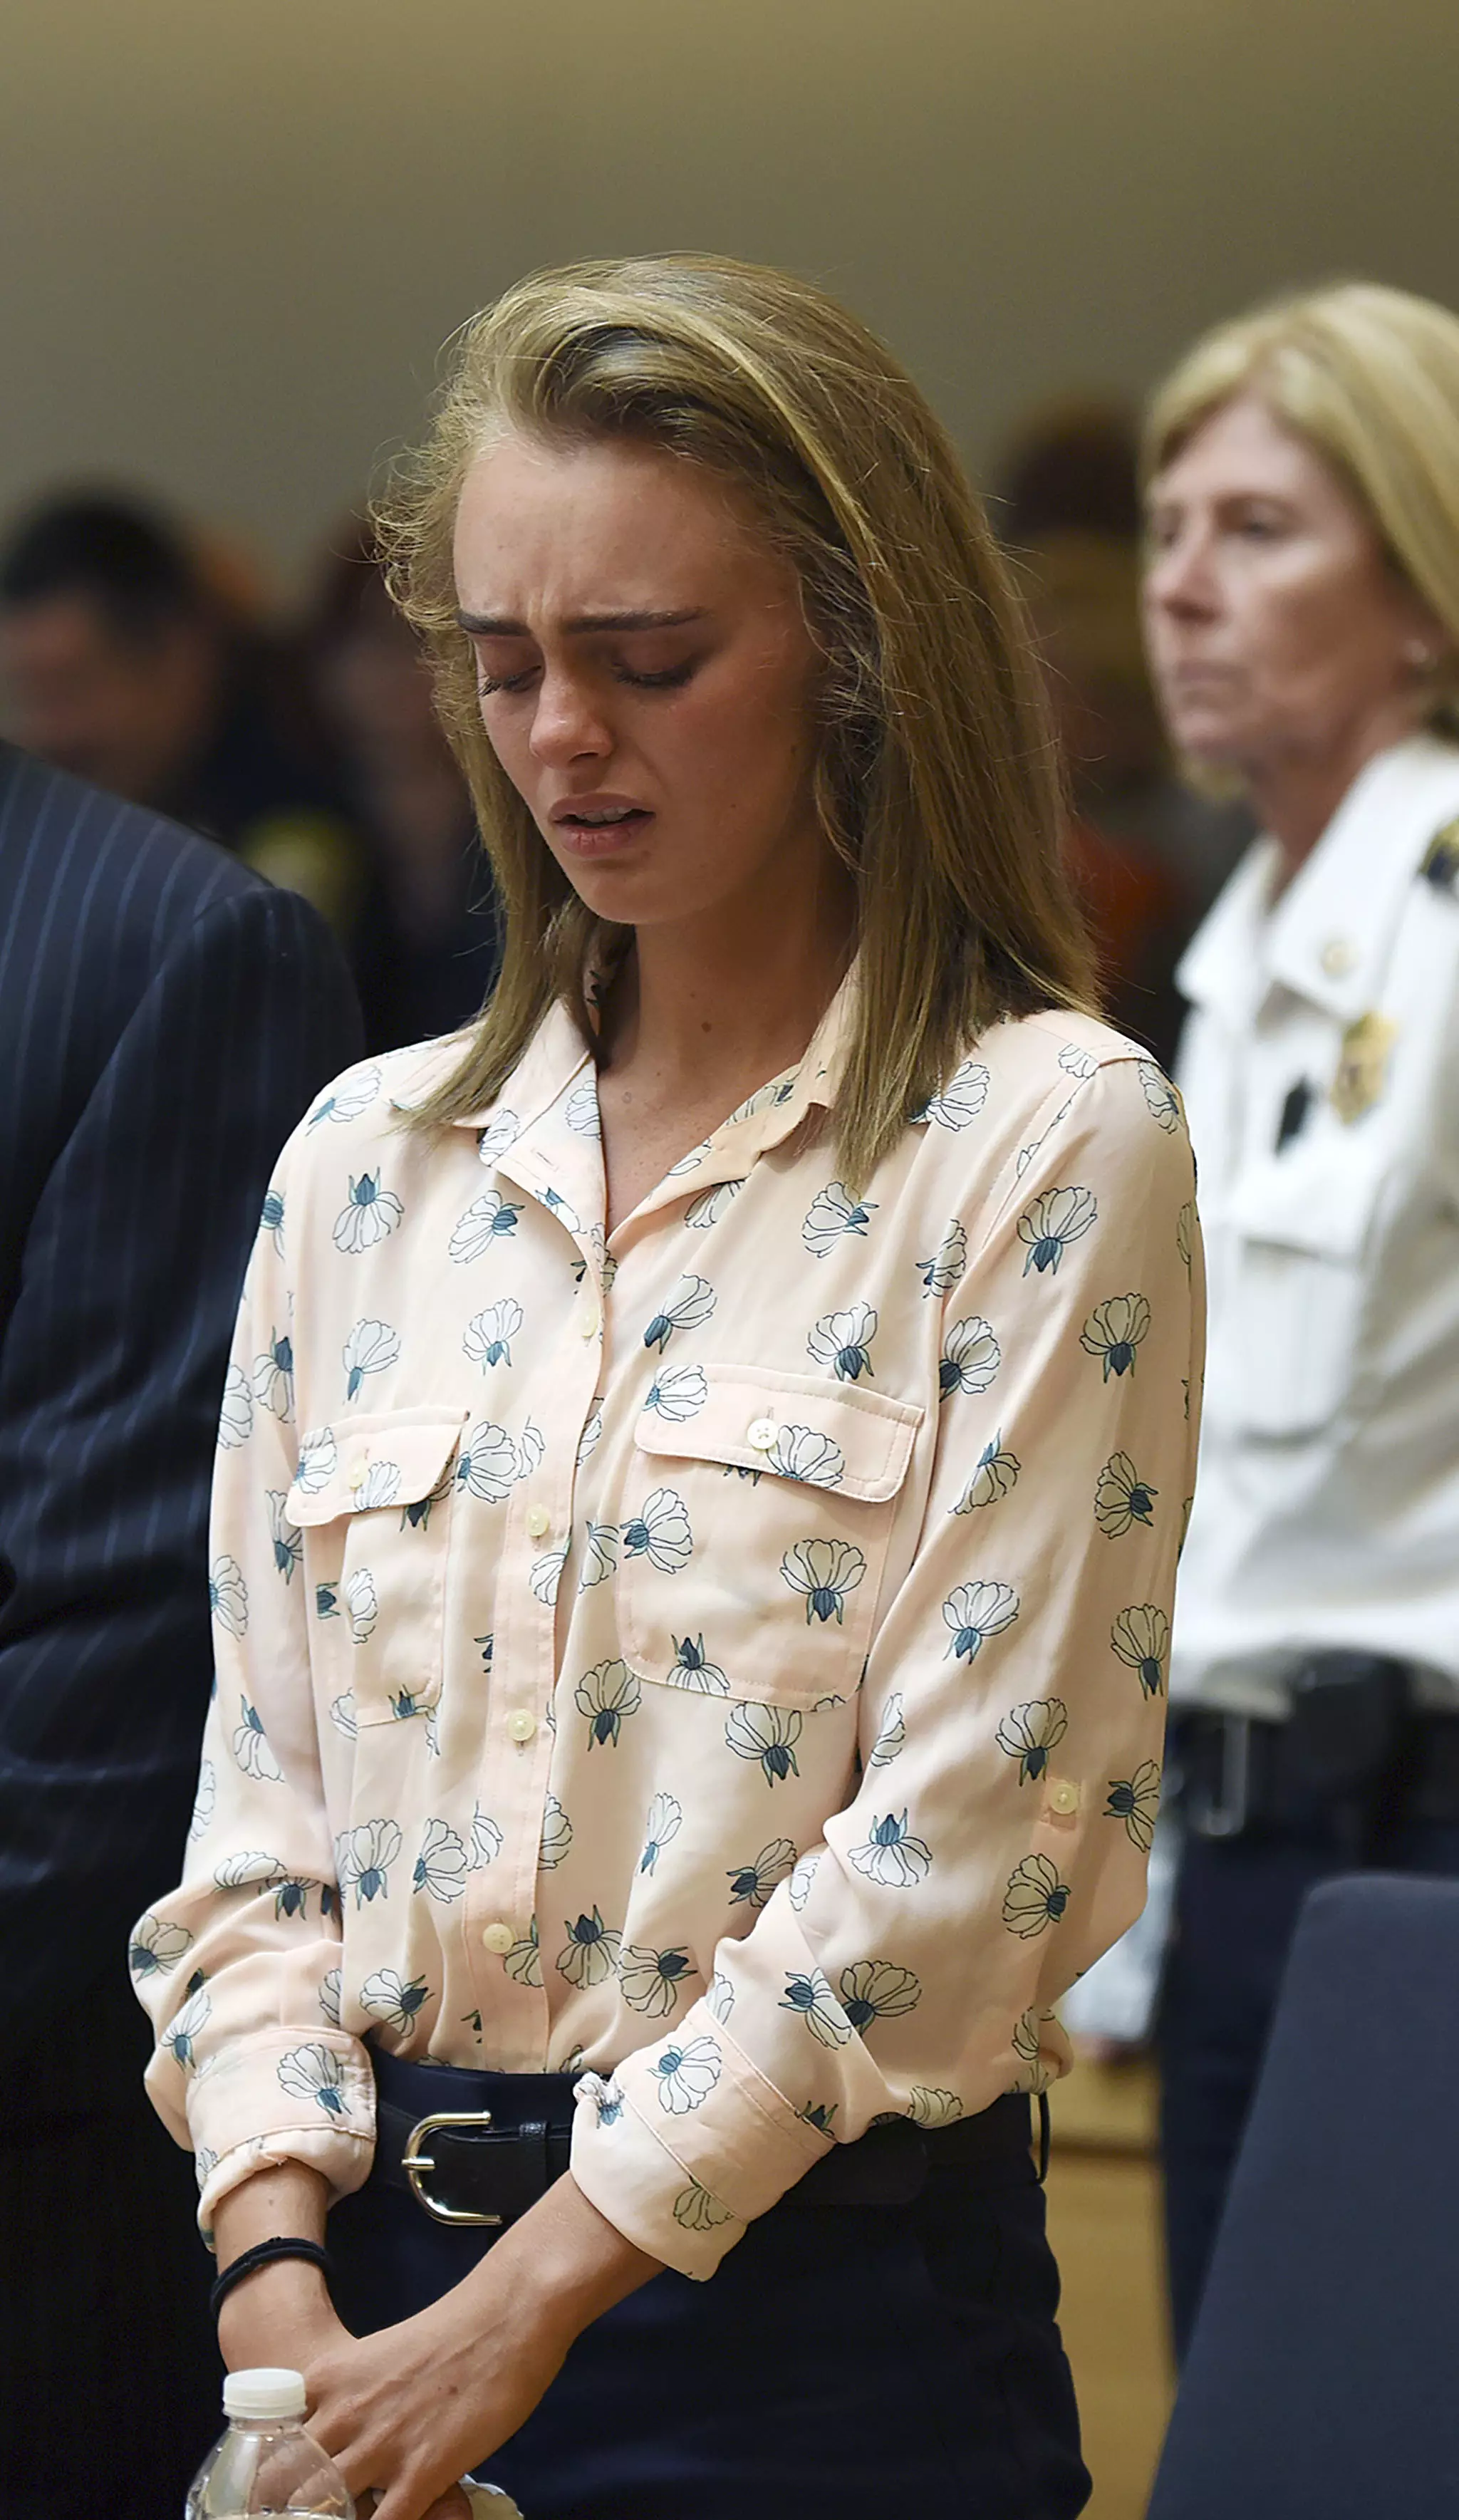 Michelle Carter cried after being found guilty of involuntary manslaughter.